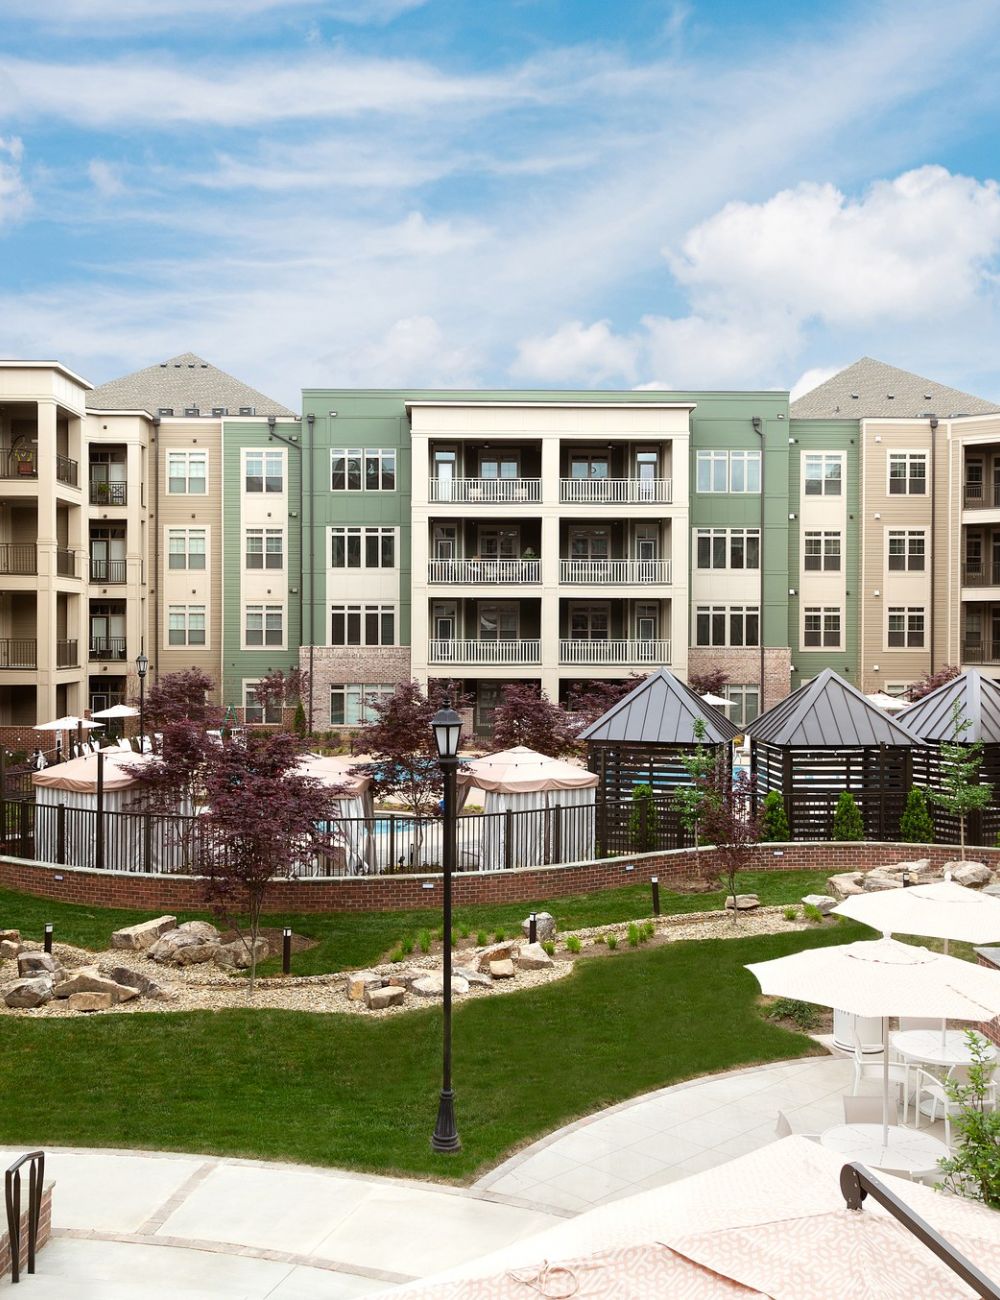 Exterior courtyard at Providence Row Apartments with beautiful landscaping, fireplace seating, and private cabanas